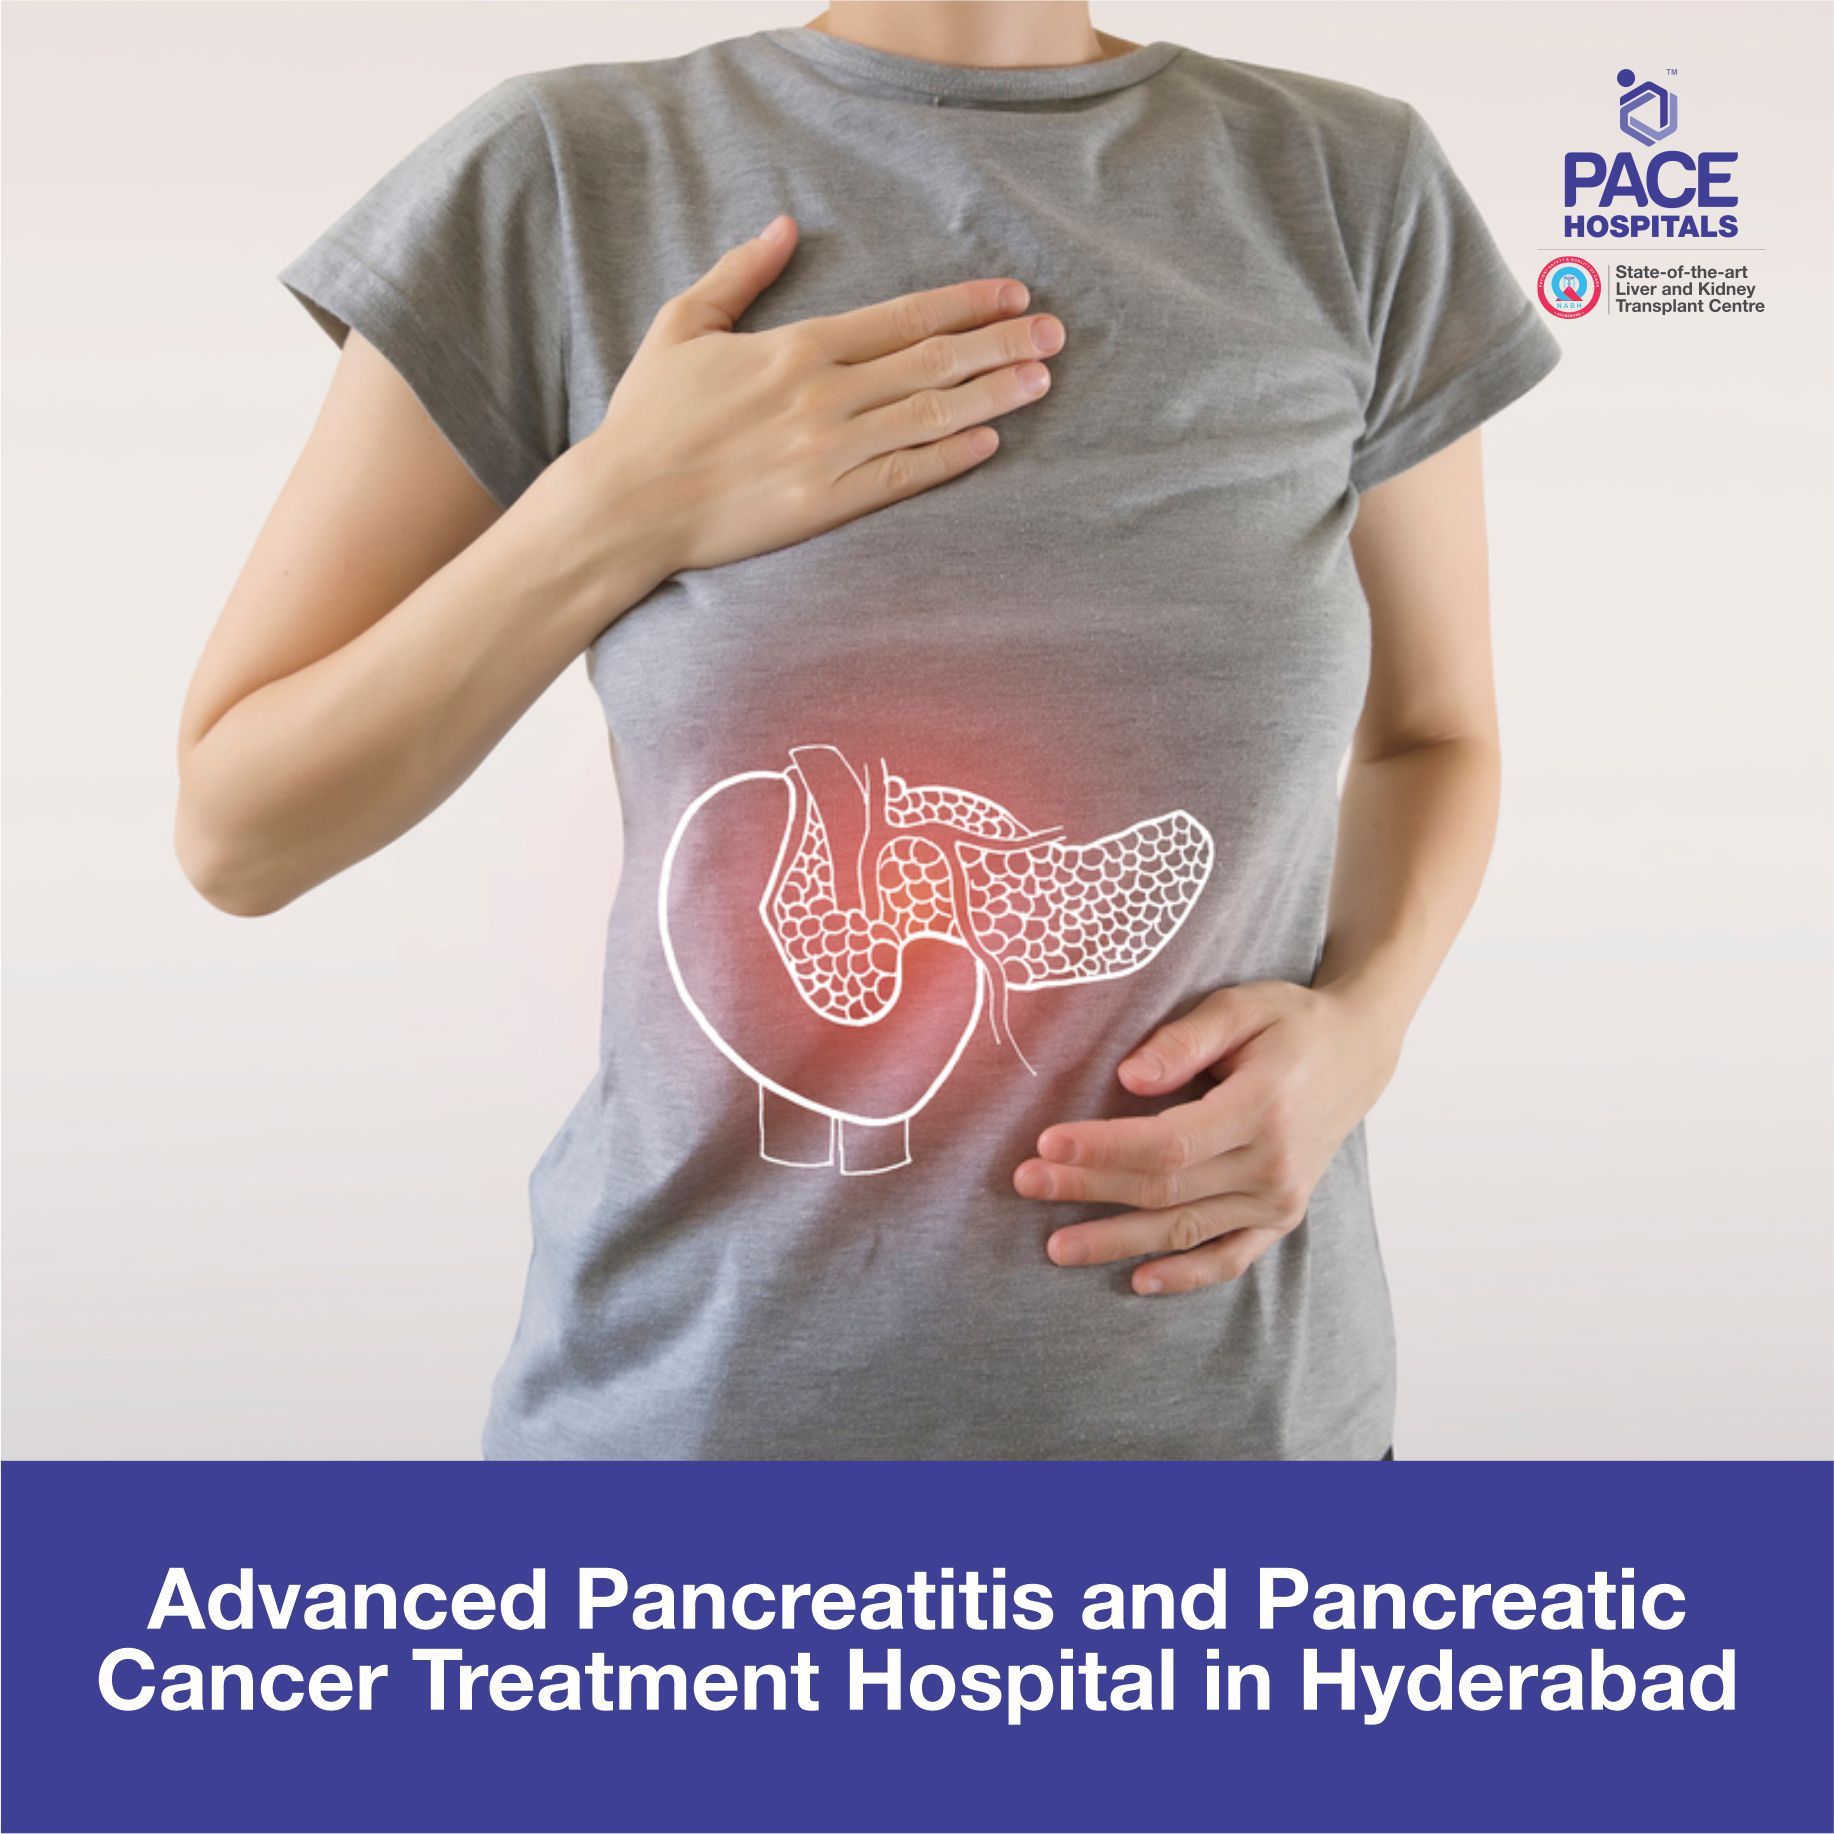 Advanced Pancreatitis and Pancreatic Cancer Treatment Hospital in Hyderabad